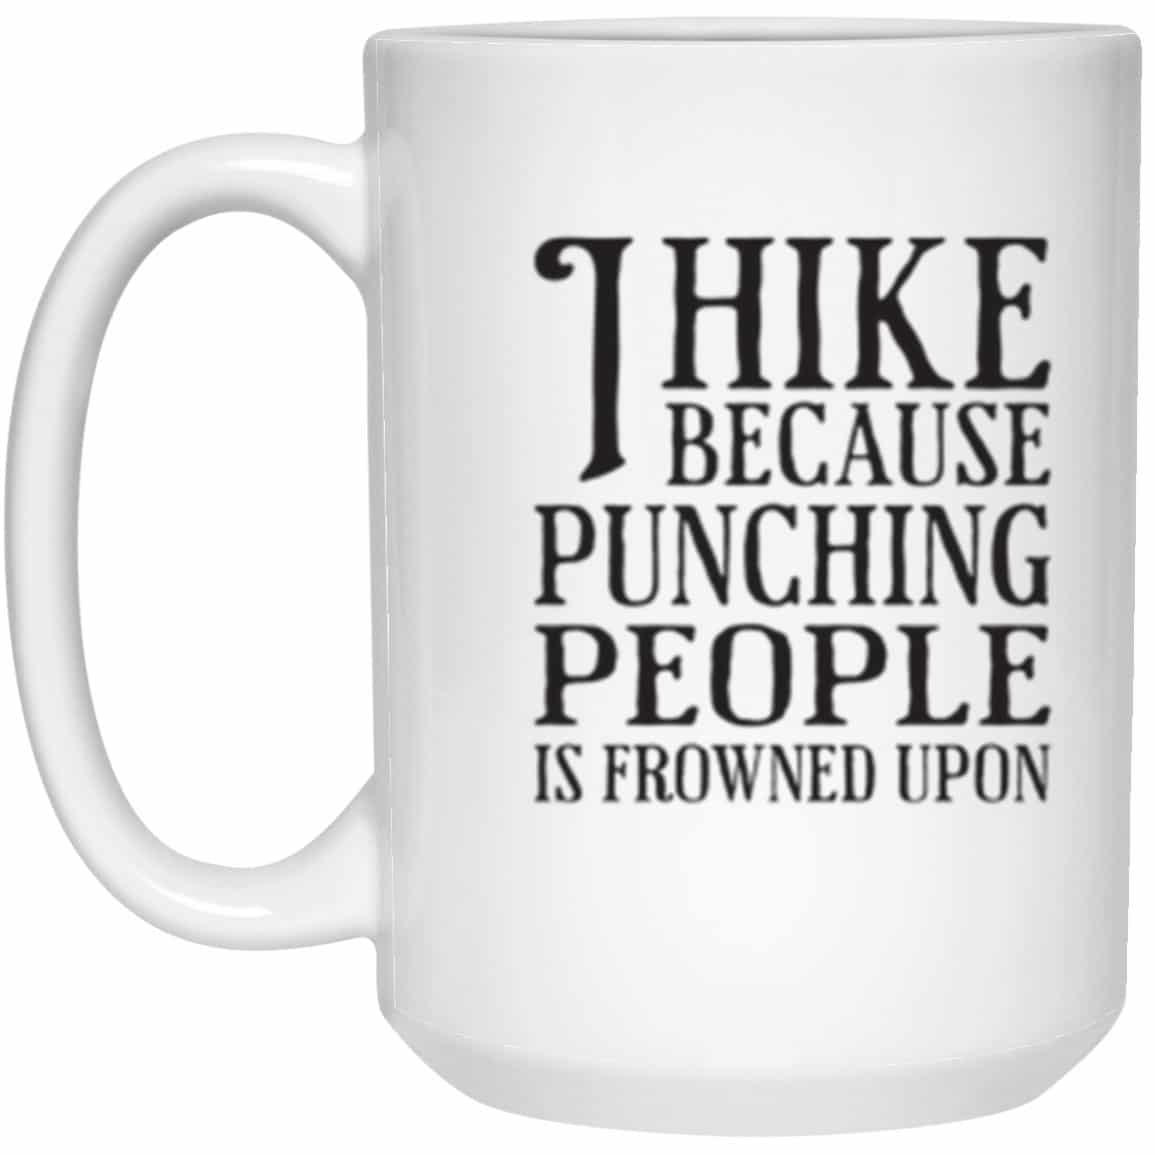 I Hike Because Punching People Is Frowned Upon 15 oz. White Coffee Mug